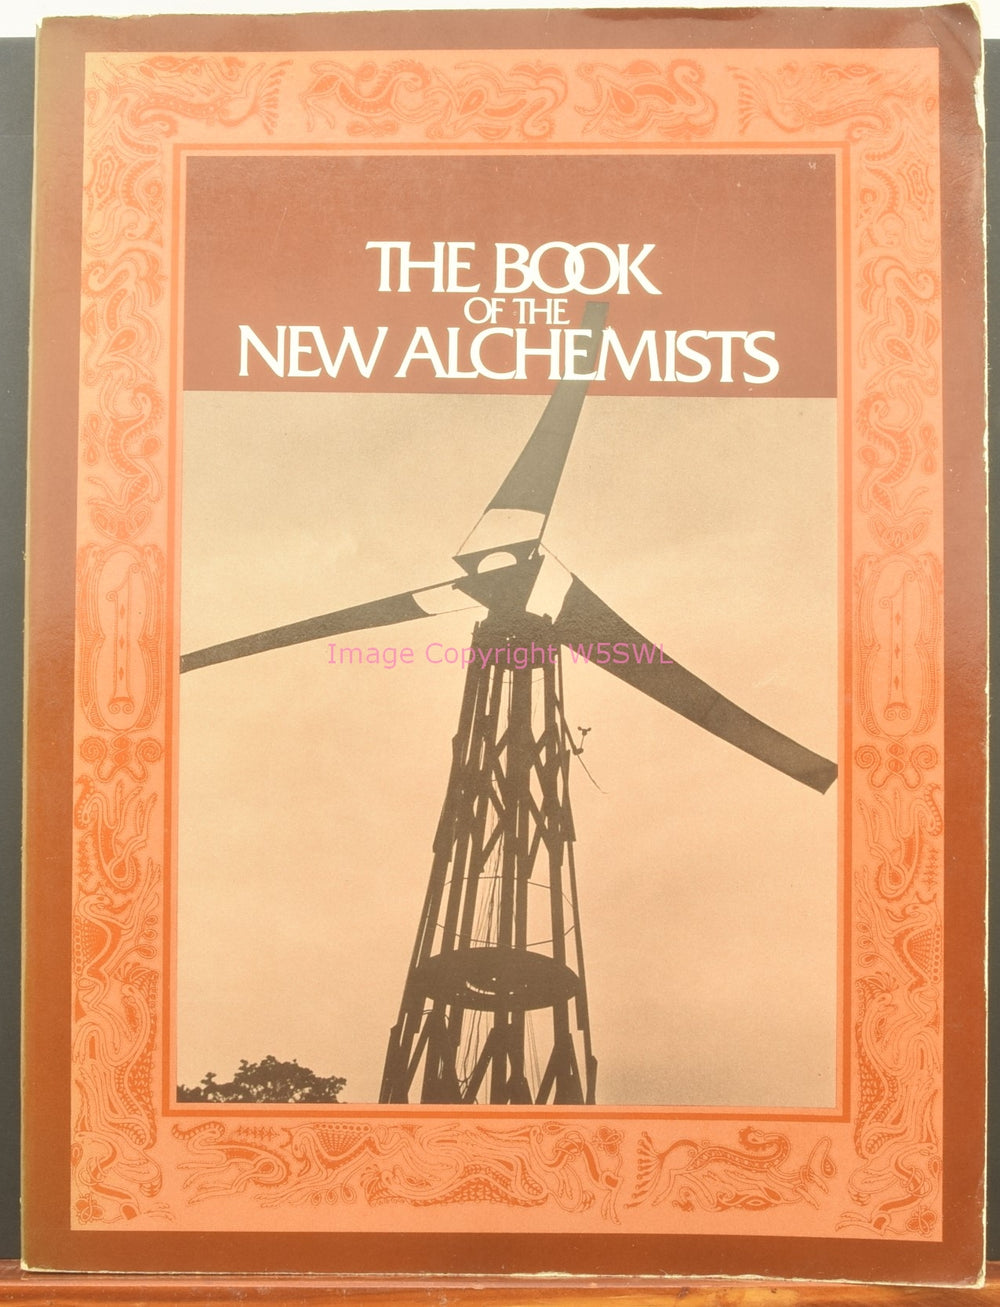 The Book Of The New Alchemists by Nancy Jack Todd New Alchemy Institute - Dave's Hobby Shop by W5SWL